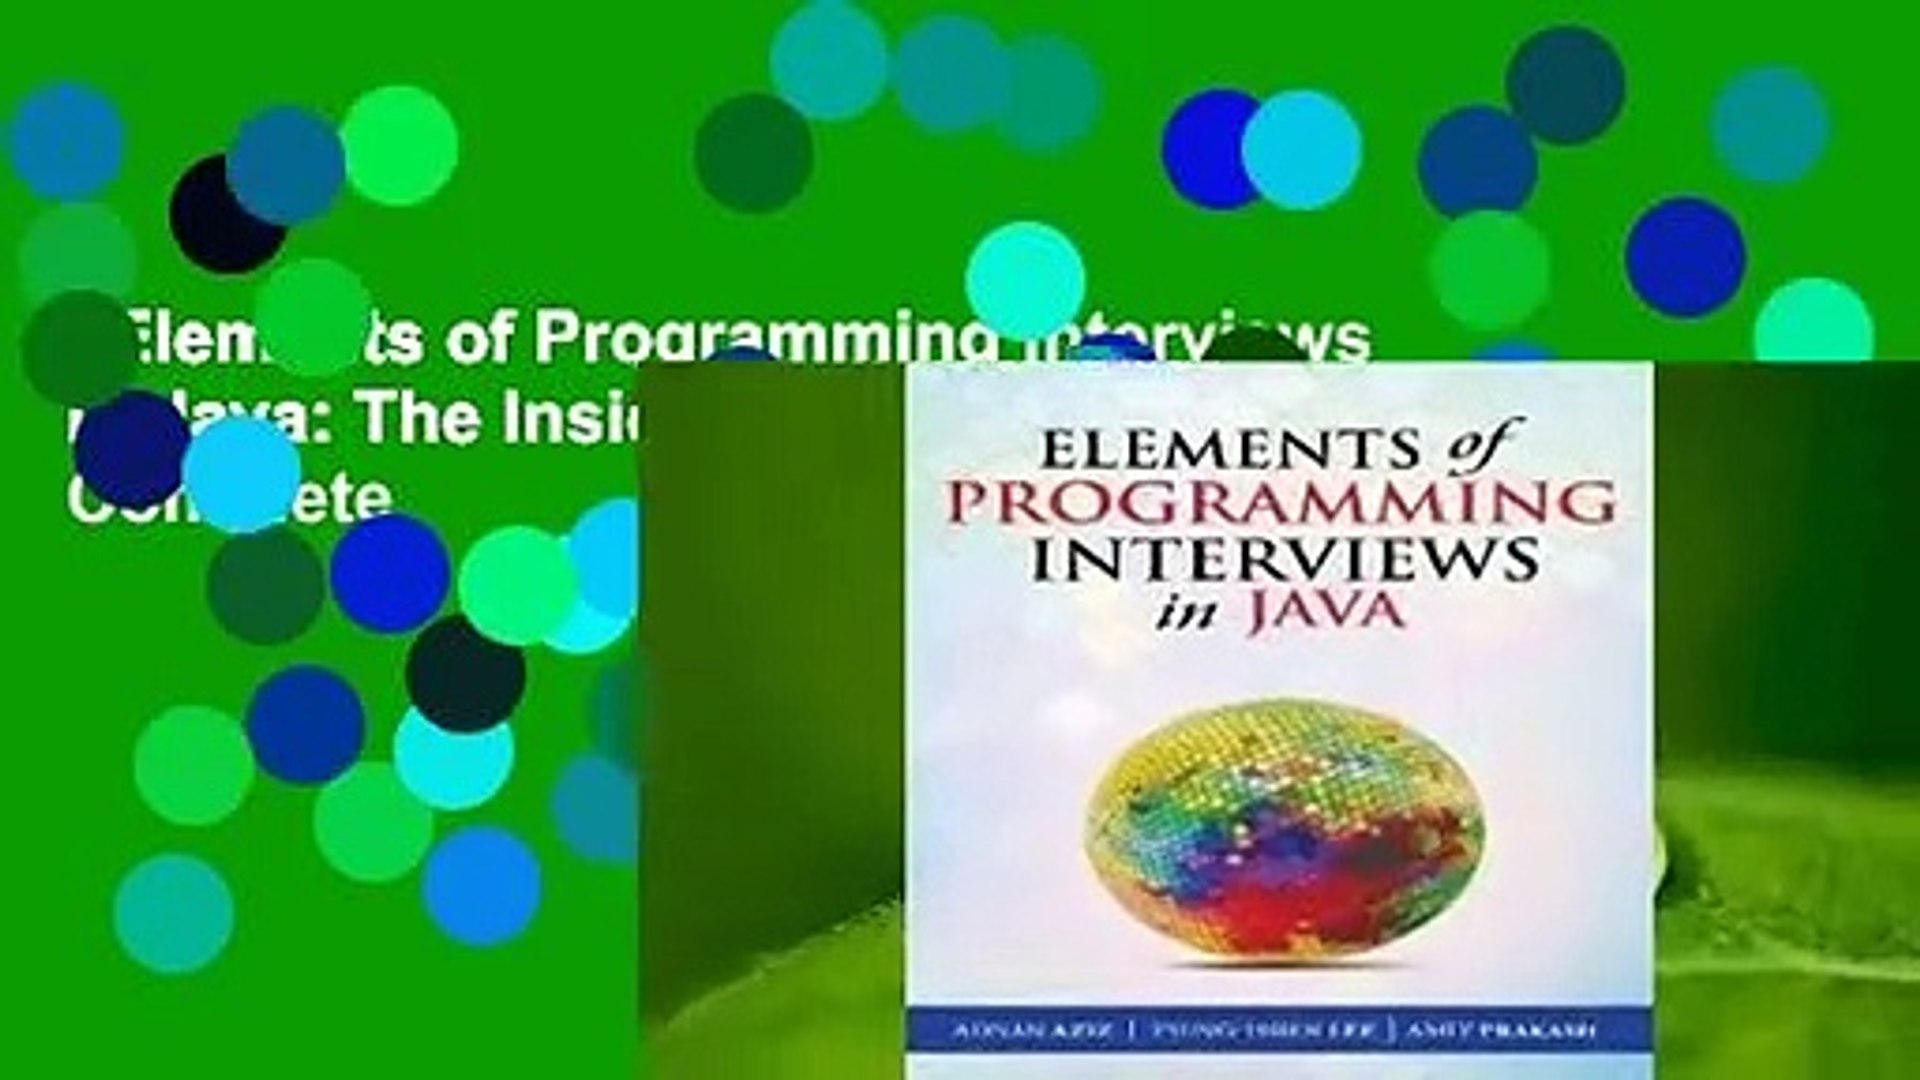 Elements of Programming Interviews in Java: The Insiders' Guide Complete